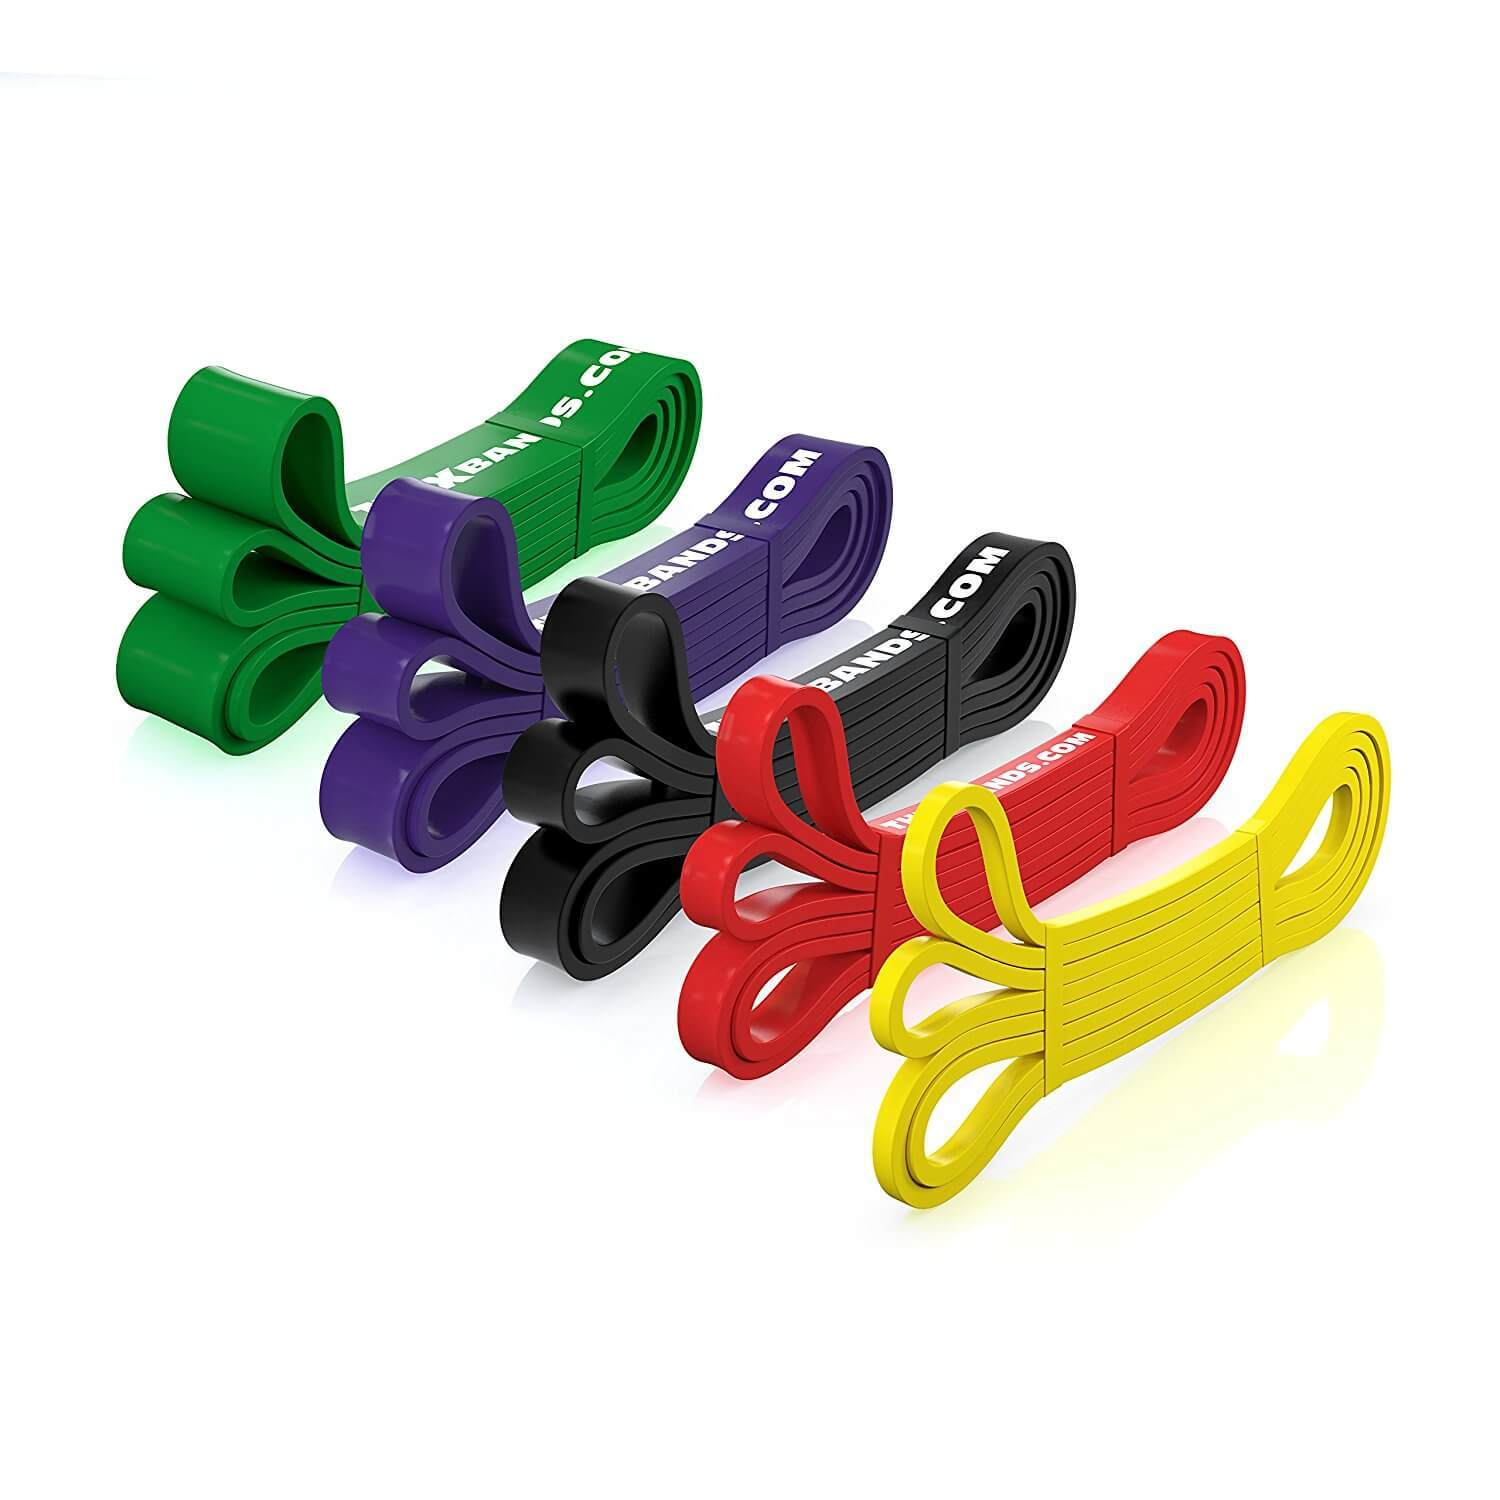 X Bands Loop Resistance Bands - Bands For Stretching To Powerlifting